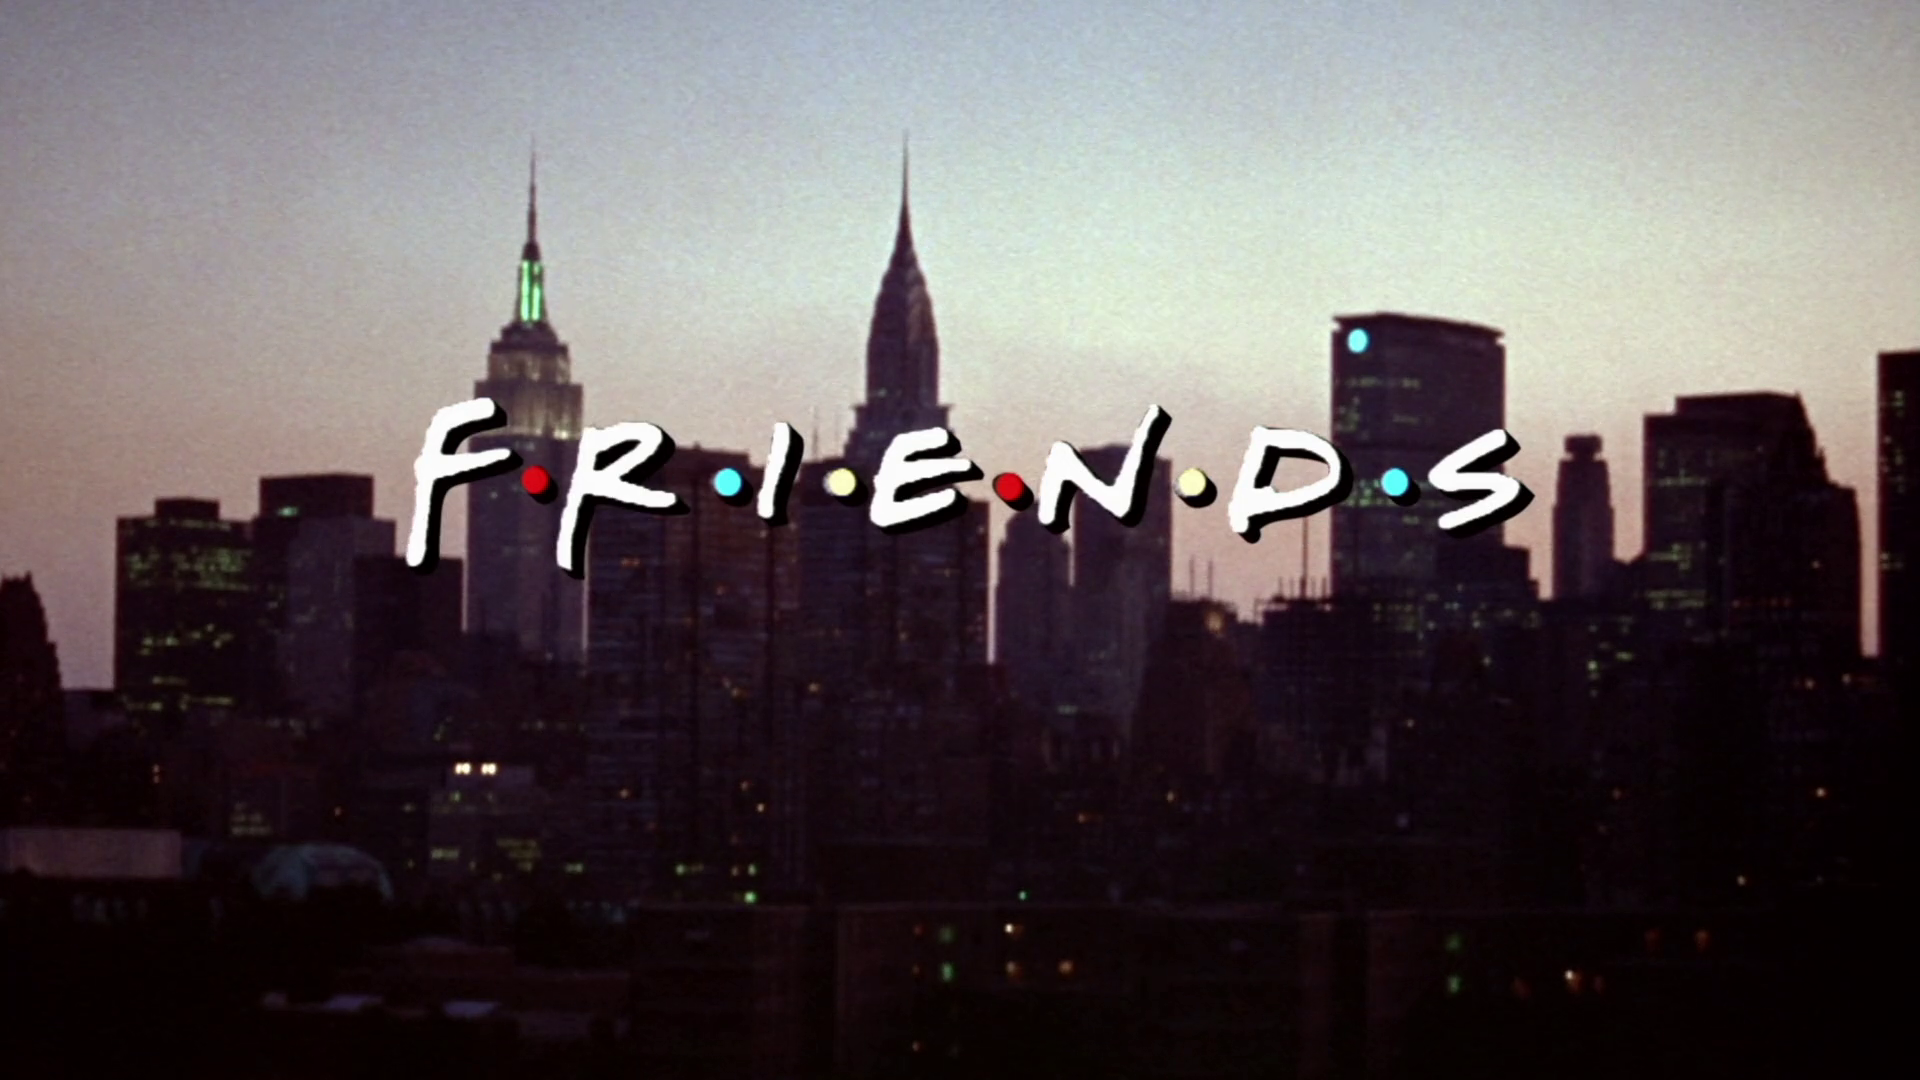 Wallpapers For Computer, Central Park, New York - Friends Logo New York -  1920x1080 Wallpaper 